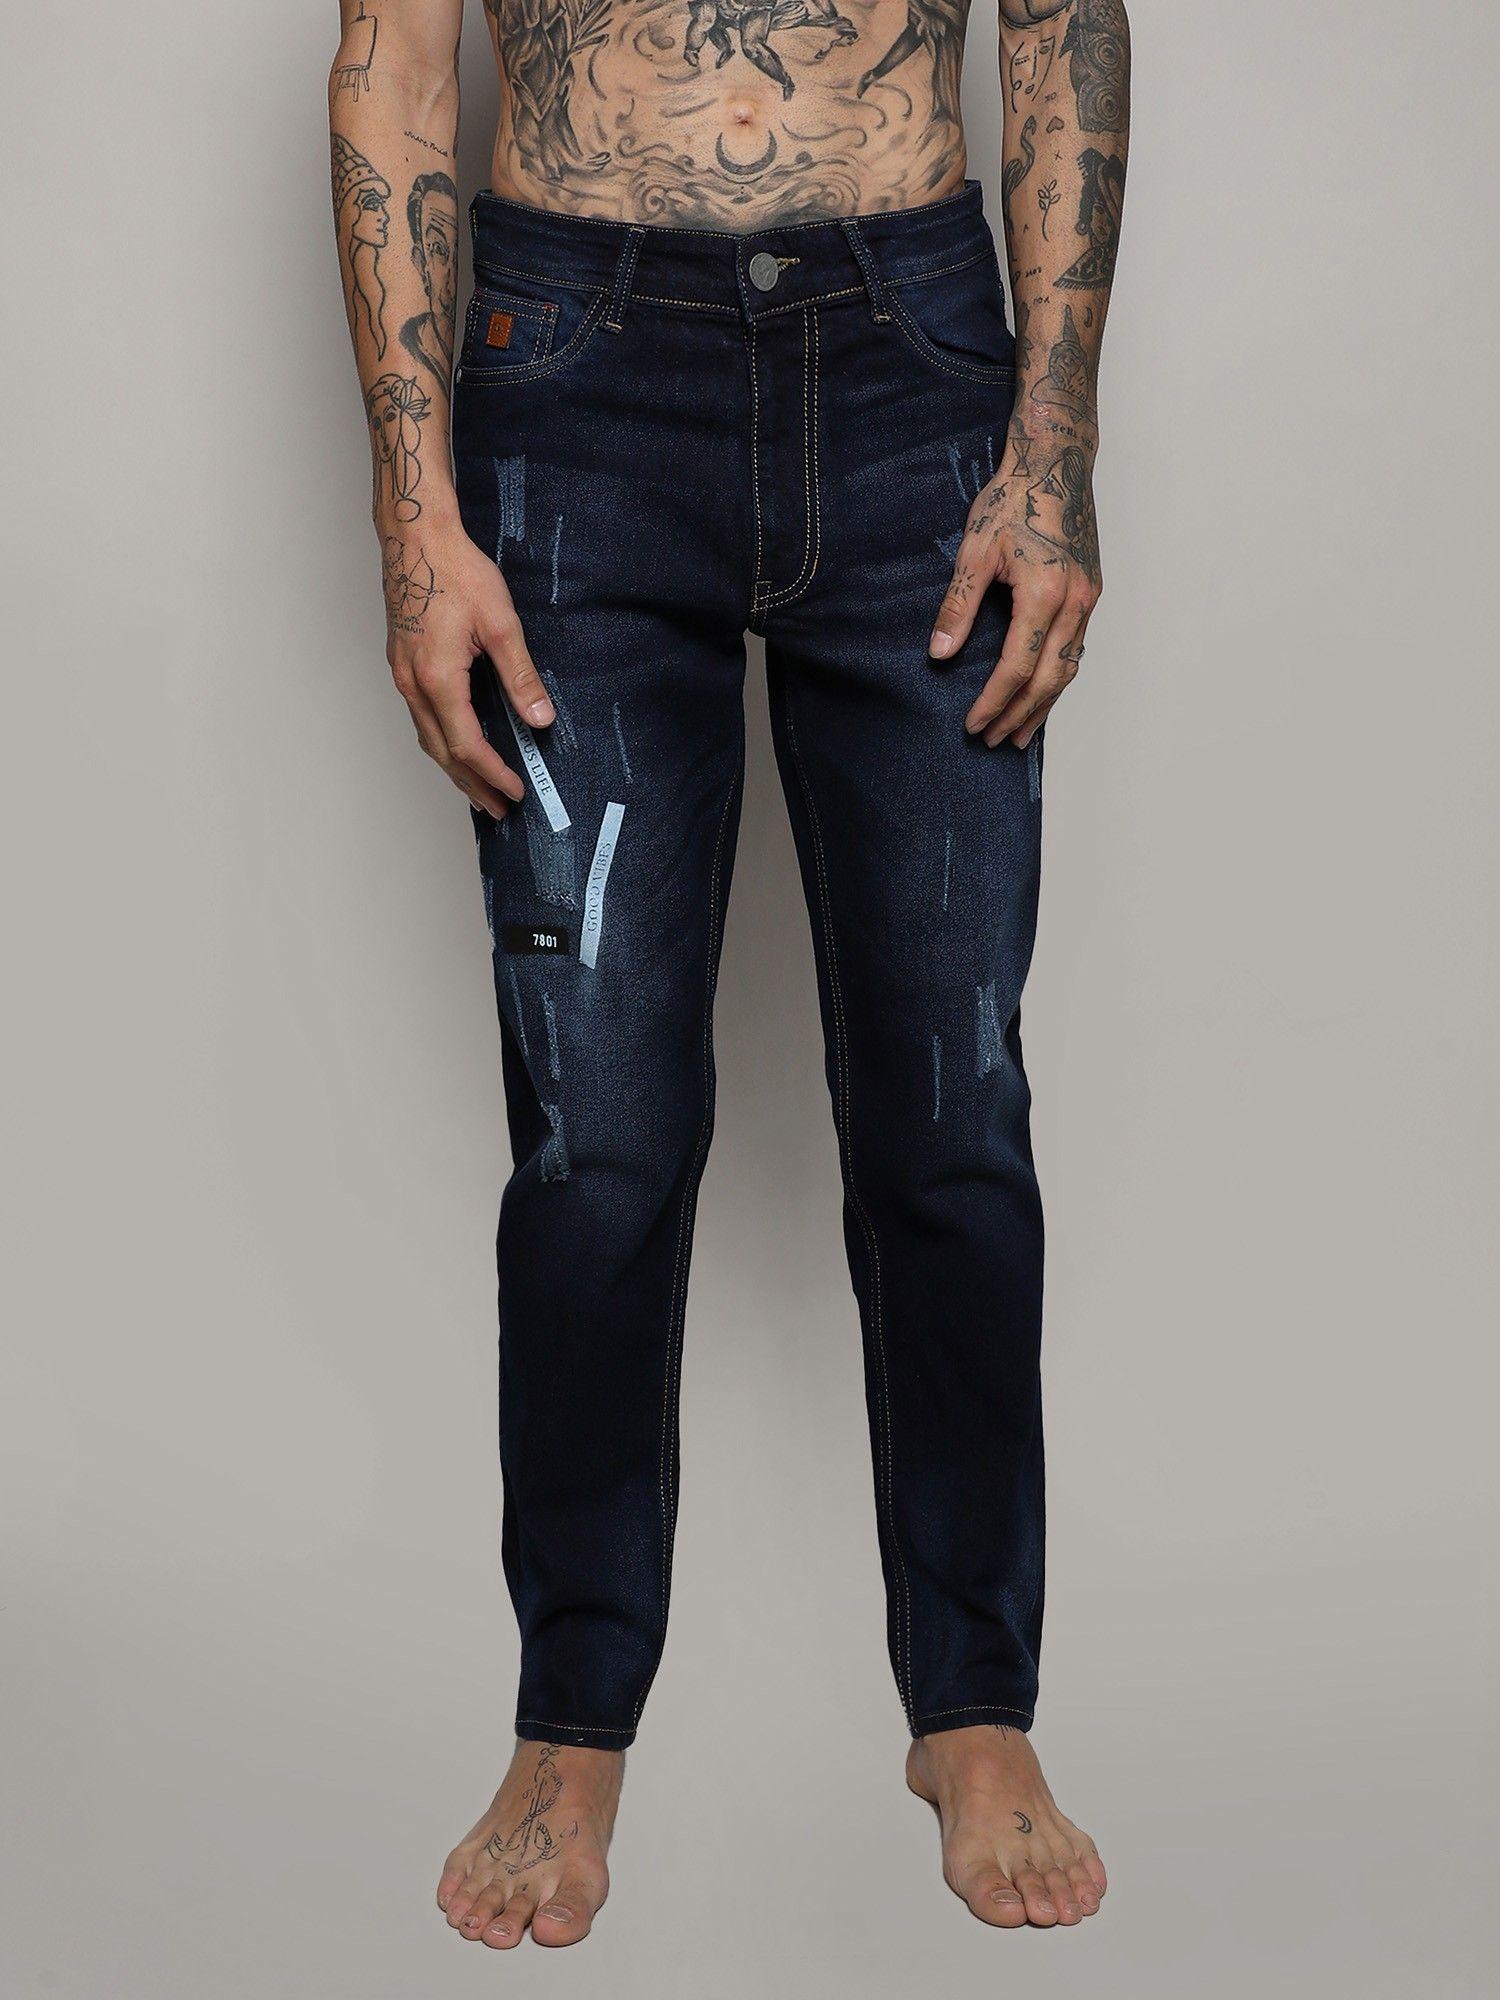 mens navy blue embroidered patched denim jeans